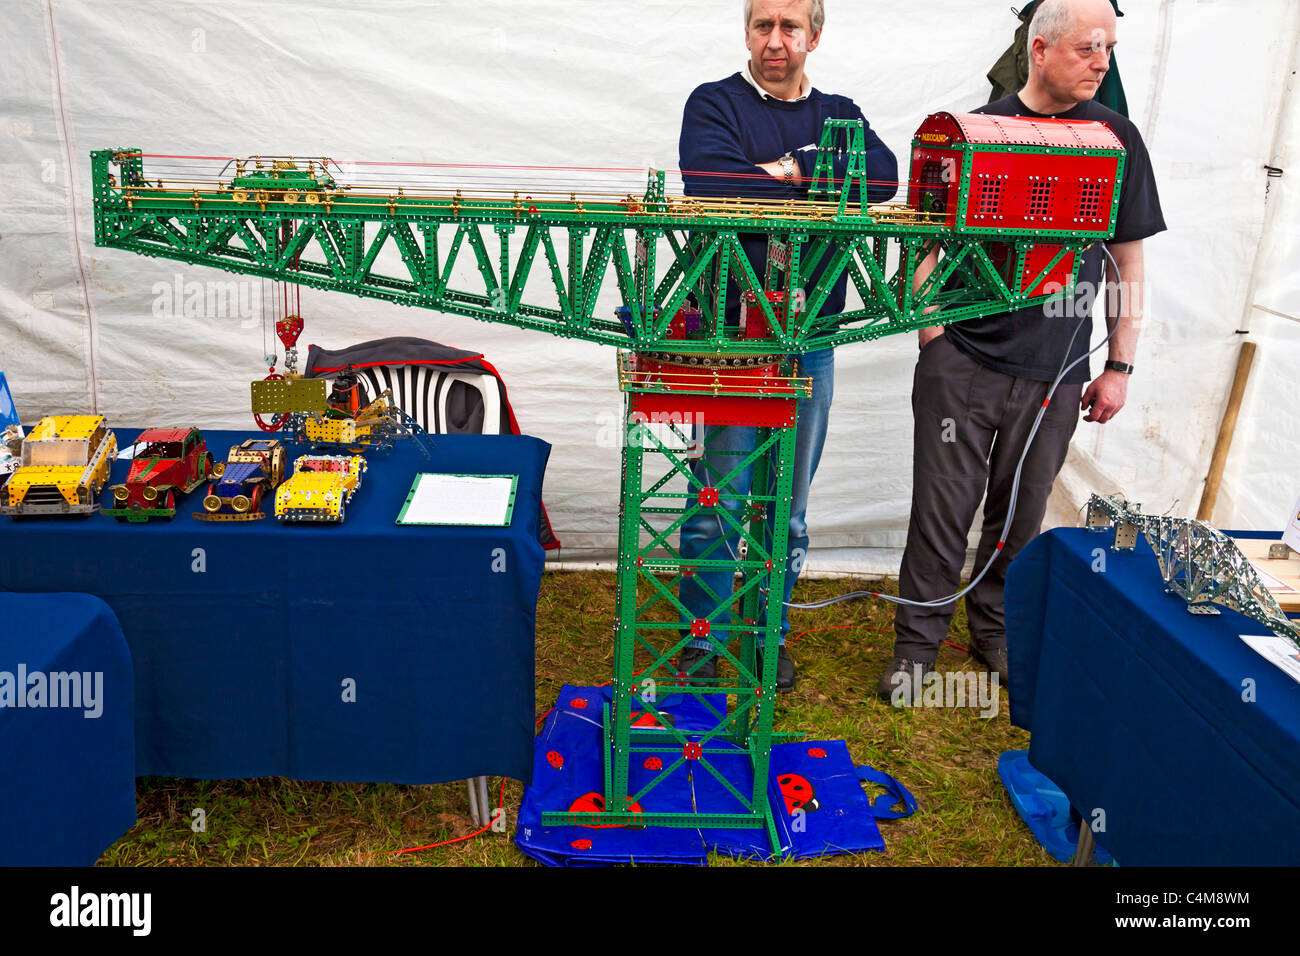 Model of a Titan crane made from traditional Meccano exhibited by members of the Meccano Society of Scotland Mauchline Holy Fair Stock Photo